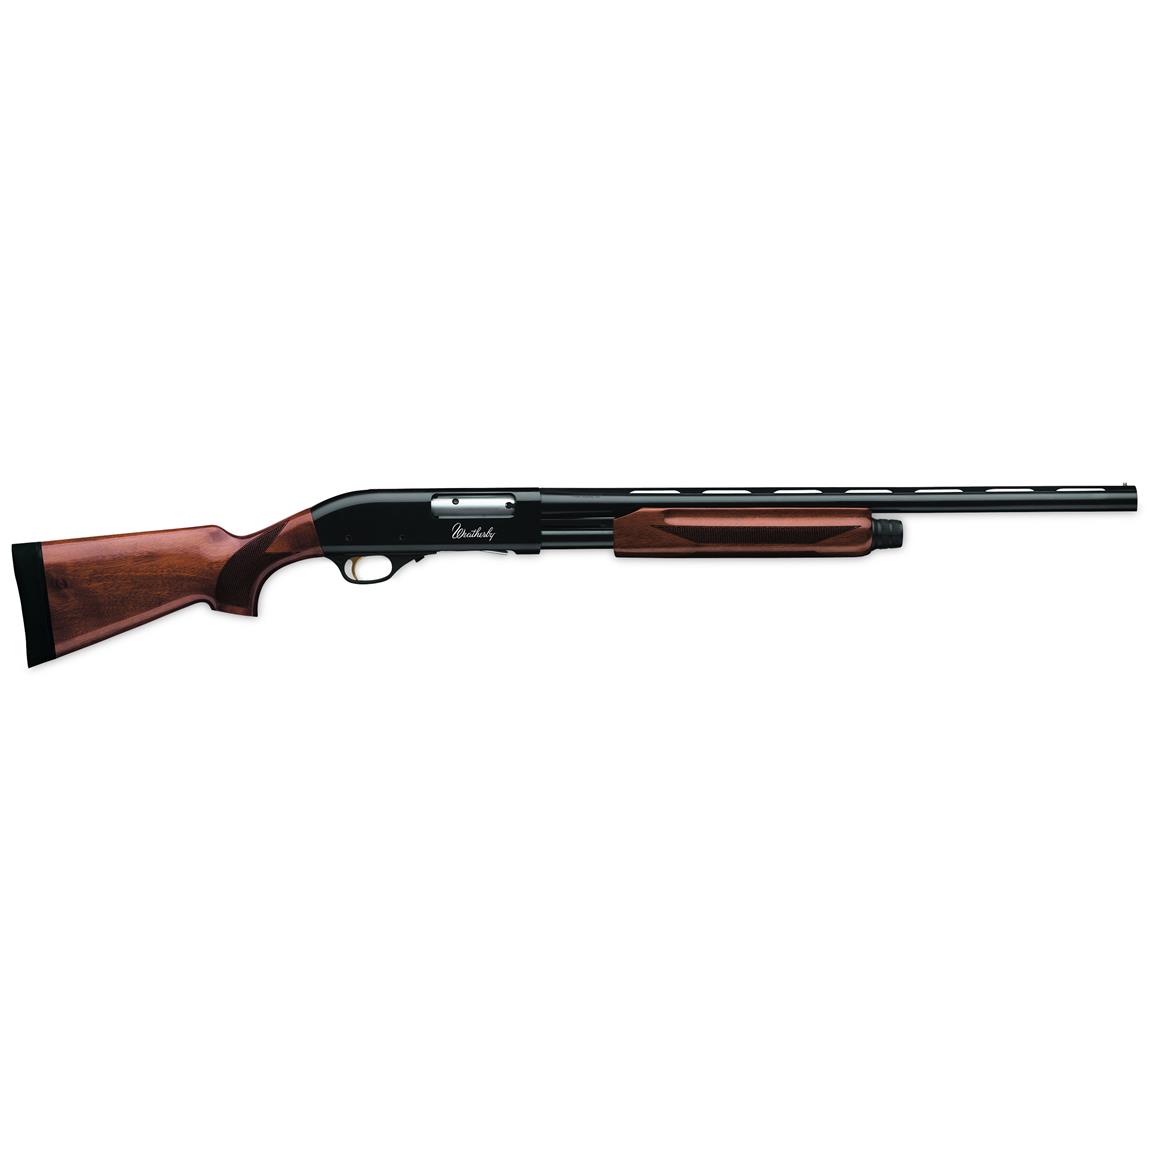 Weatherby PA-08 Upland Youth, Pump Action, 20 Gauge, 22" Barrel, 4+1 Rounds